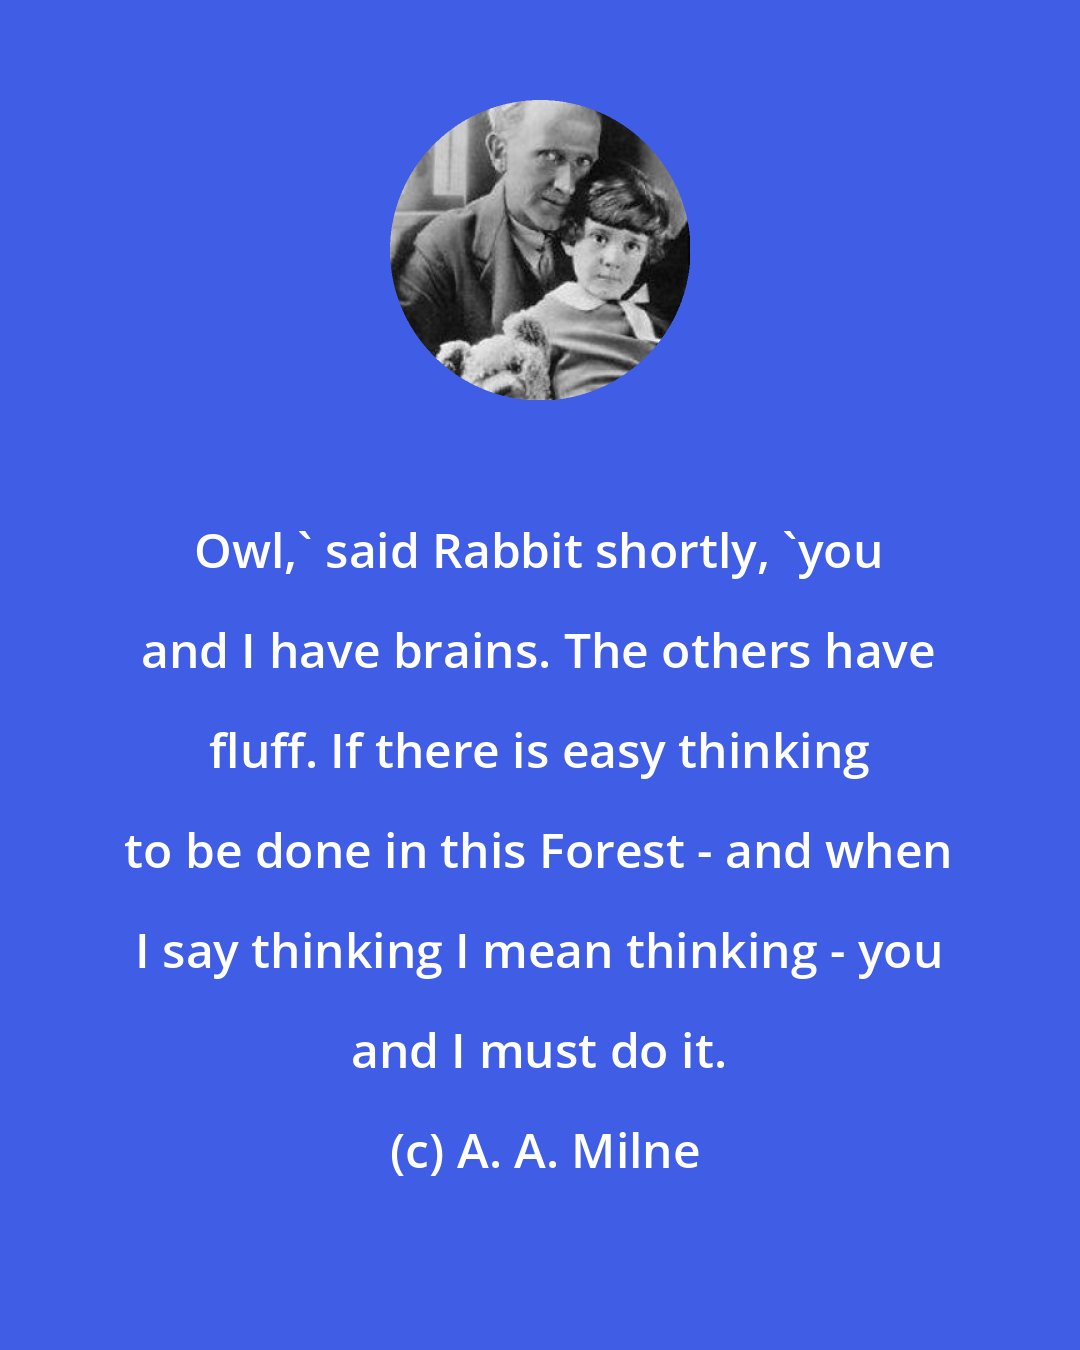 A. A. Milne: Owl,' said Rabbit shortly, 'you and I have brains. The others have fluff. If there is easy thinking to be done in this Forest - and when I say thinking I mean thinking - you and I must do it.